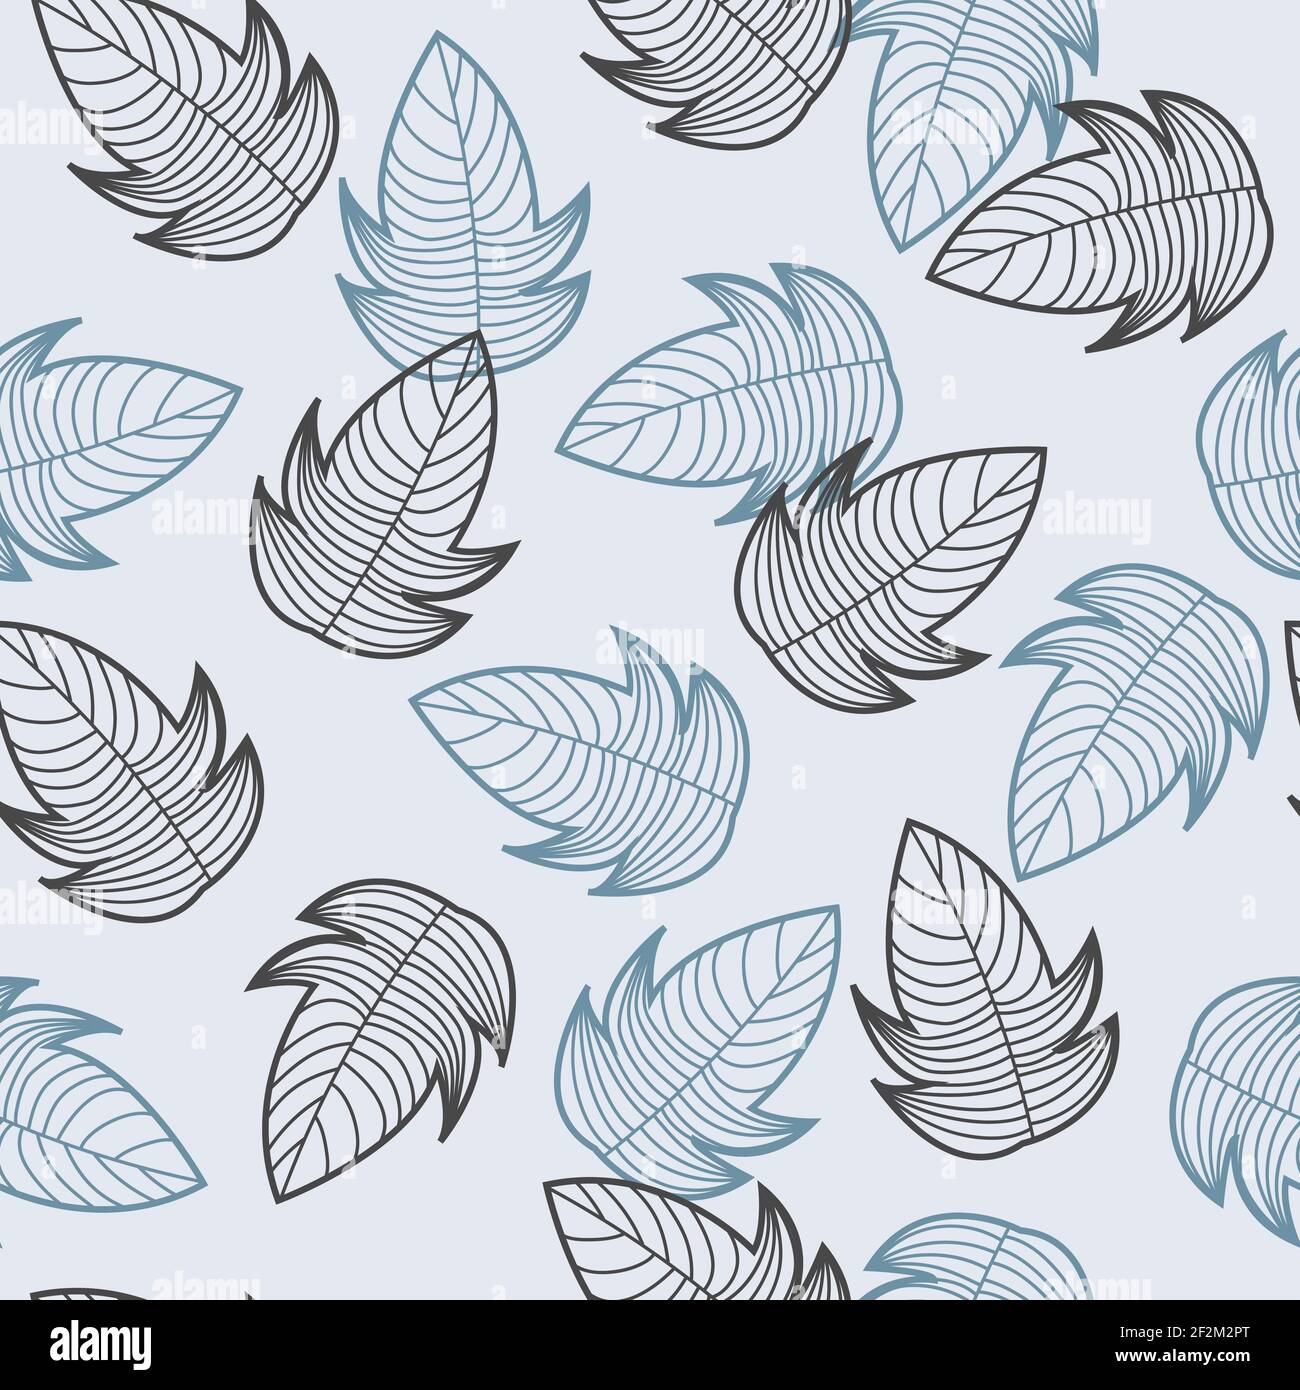 Five cornered leaves outlines seamless pattern Stock Vector